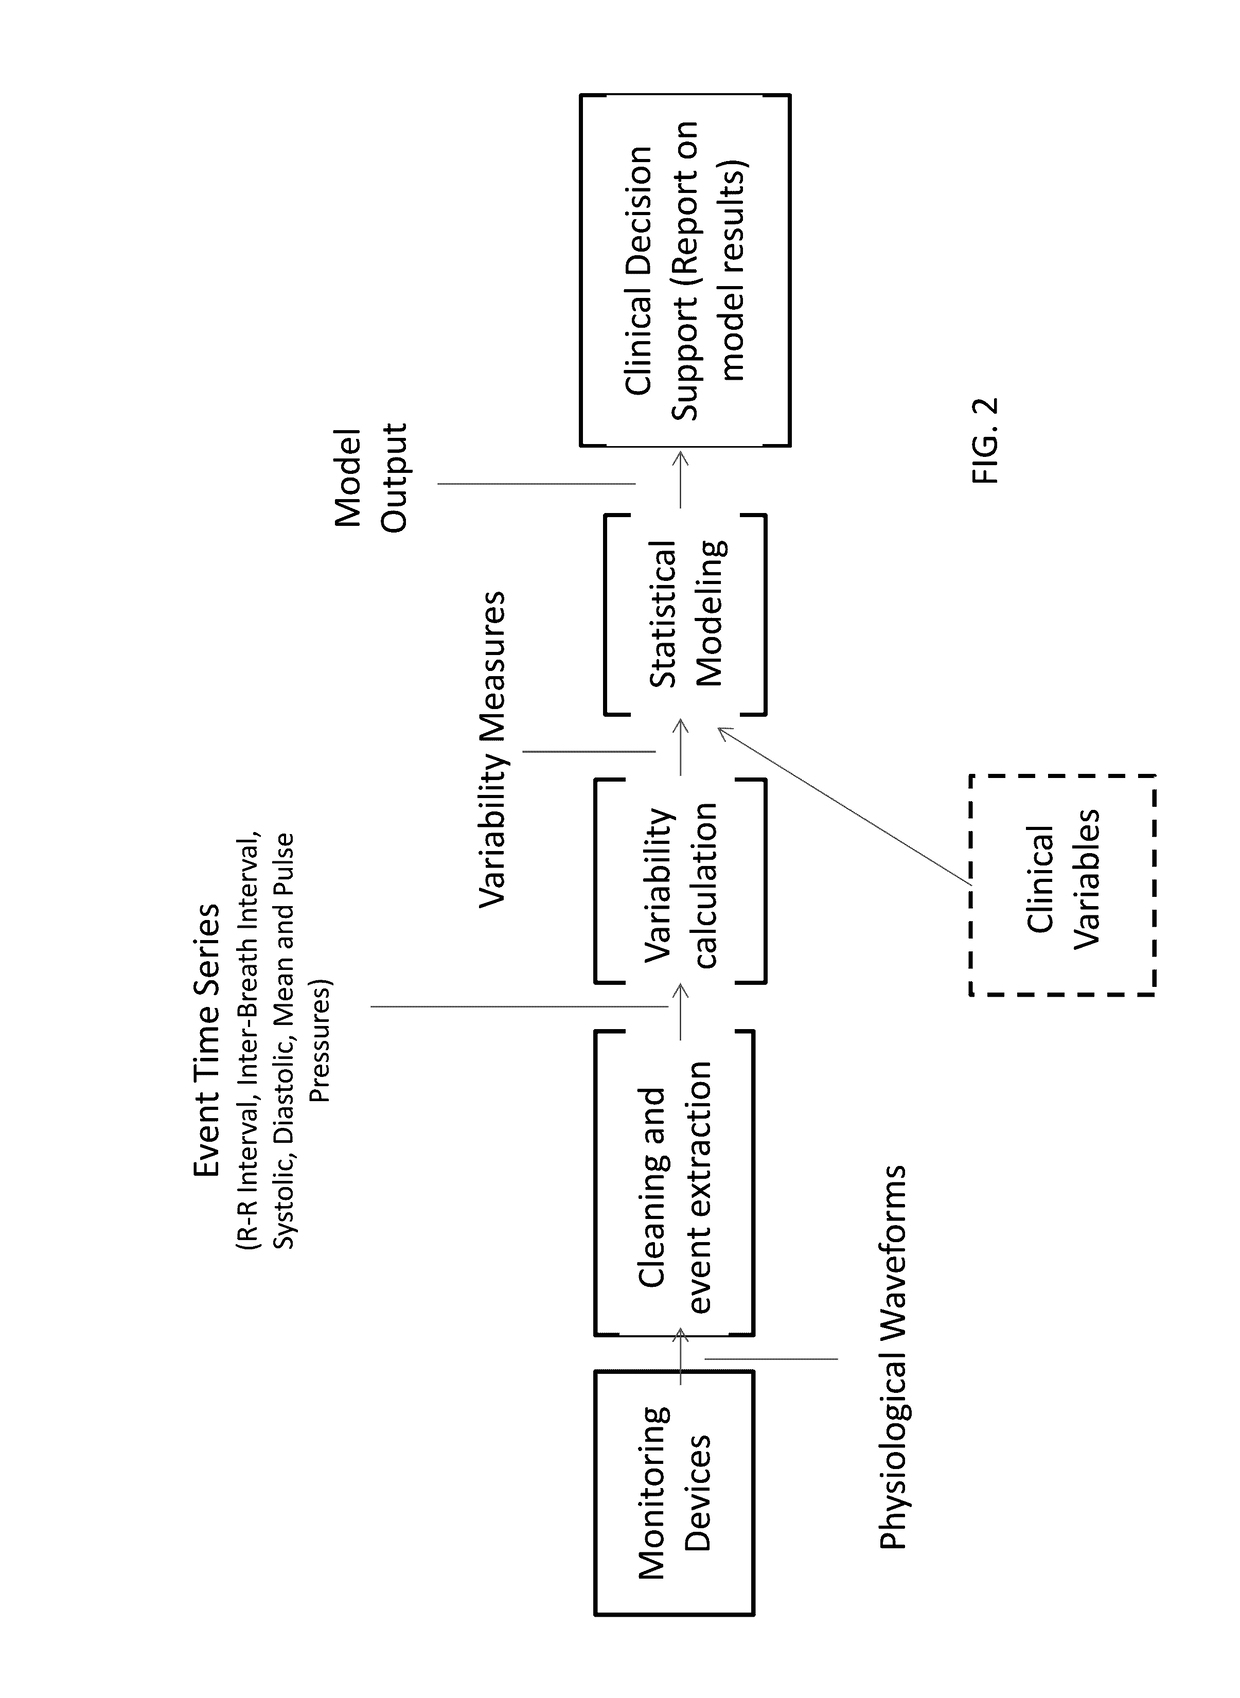 System and Method for Assisting Decisions Associated with Events Relative to Withdrawal of Life-Sustaining Therapy Using Variability Measurements